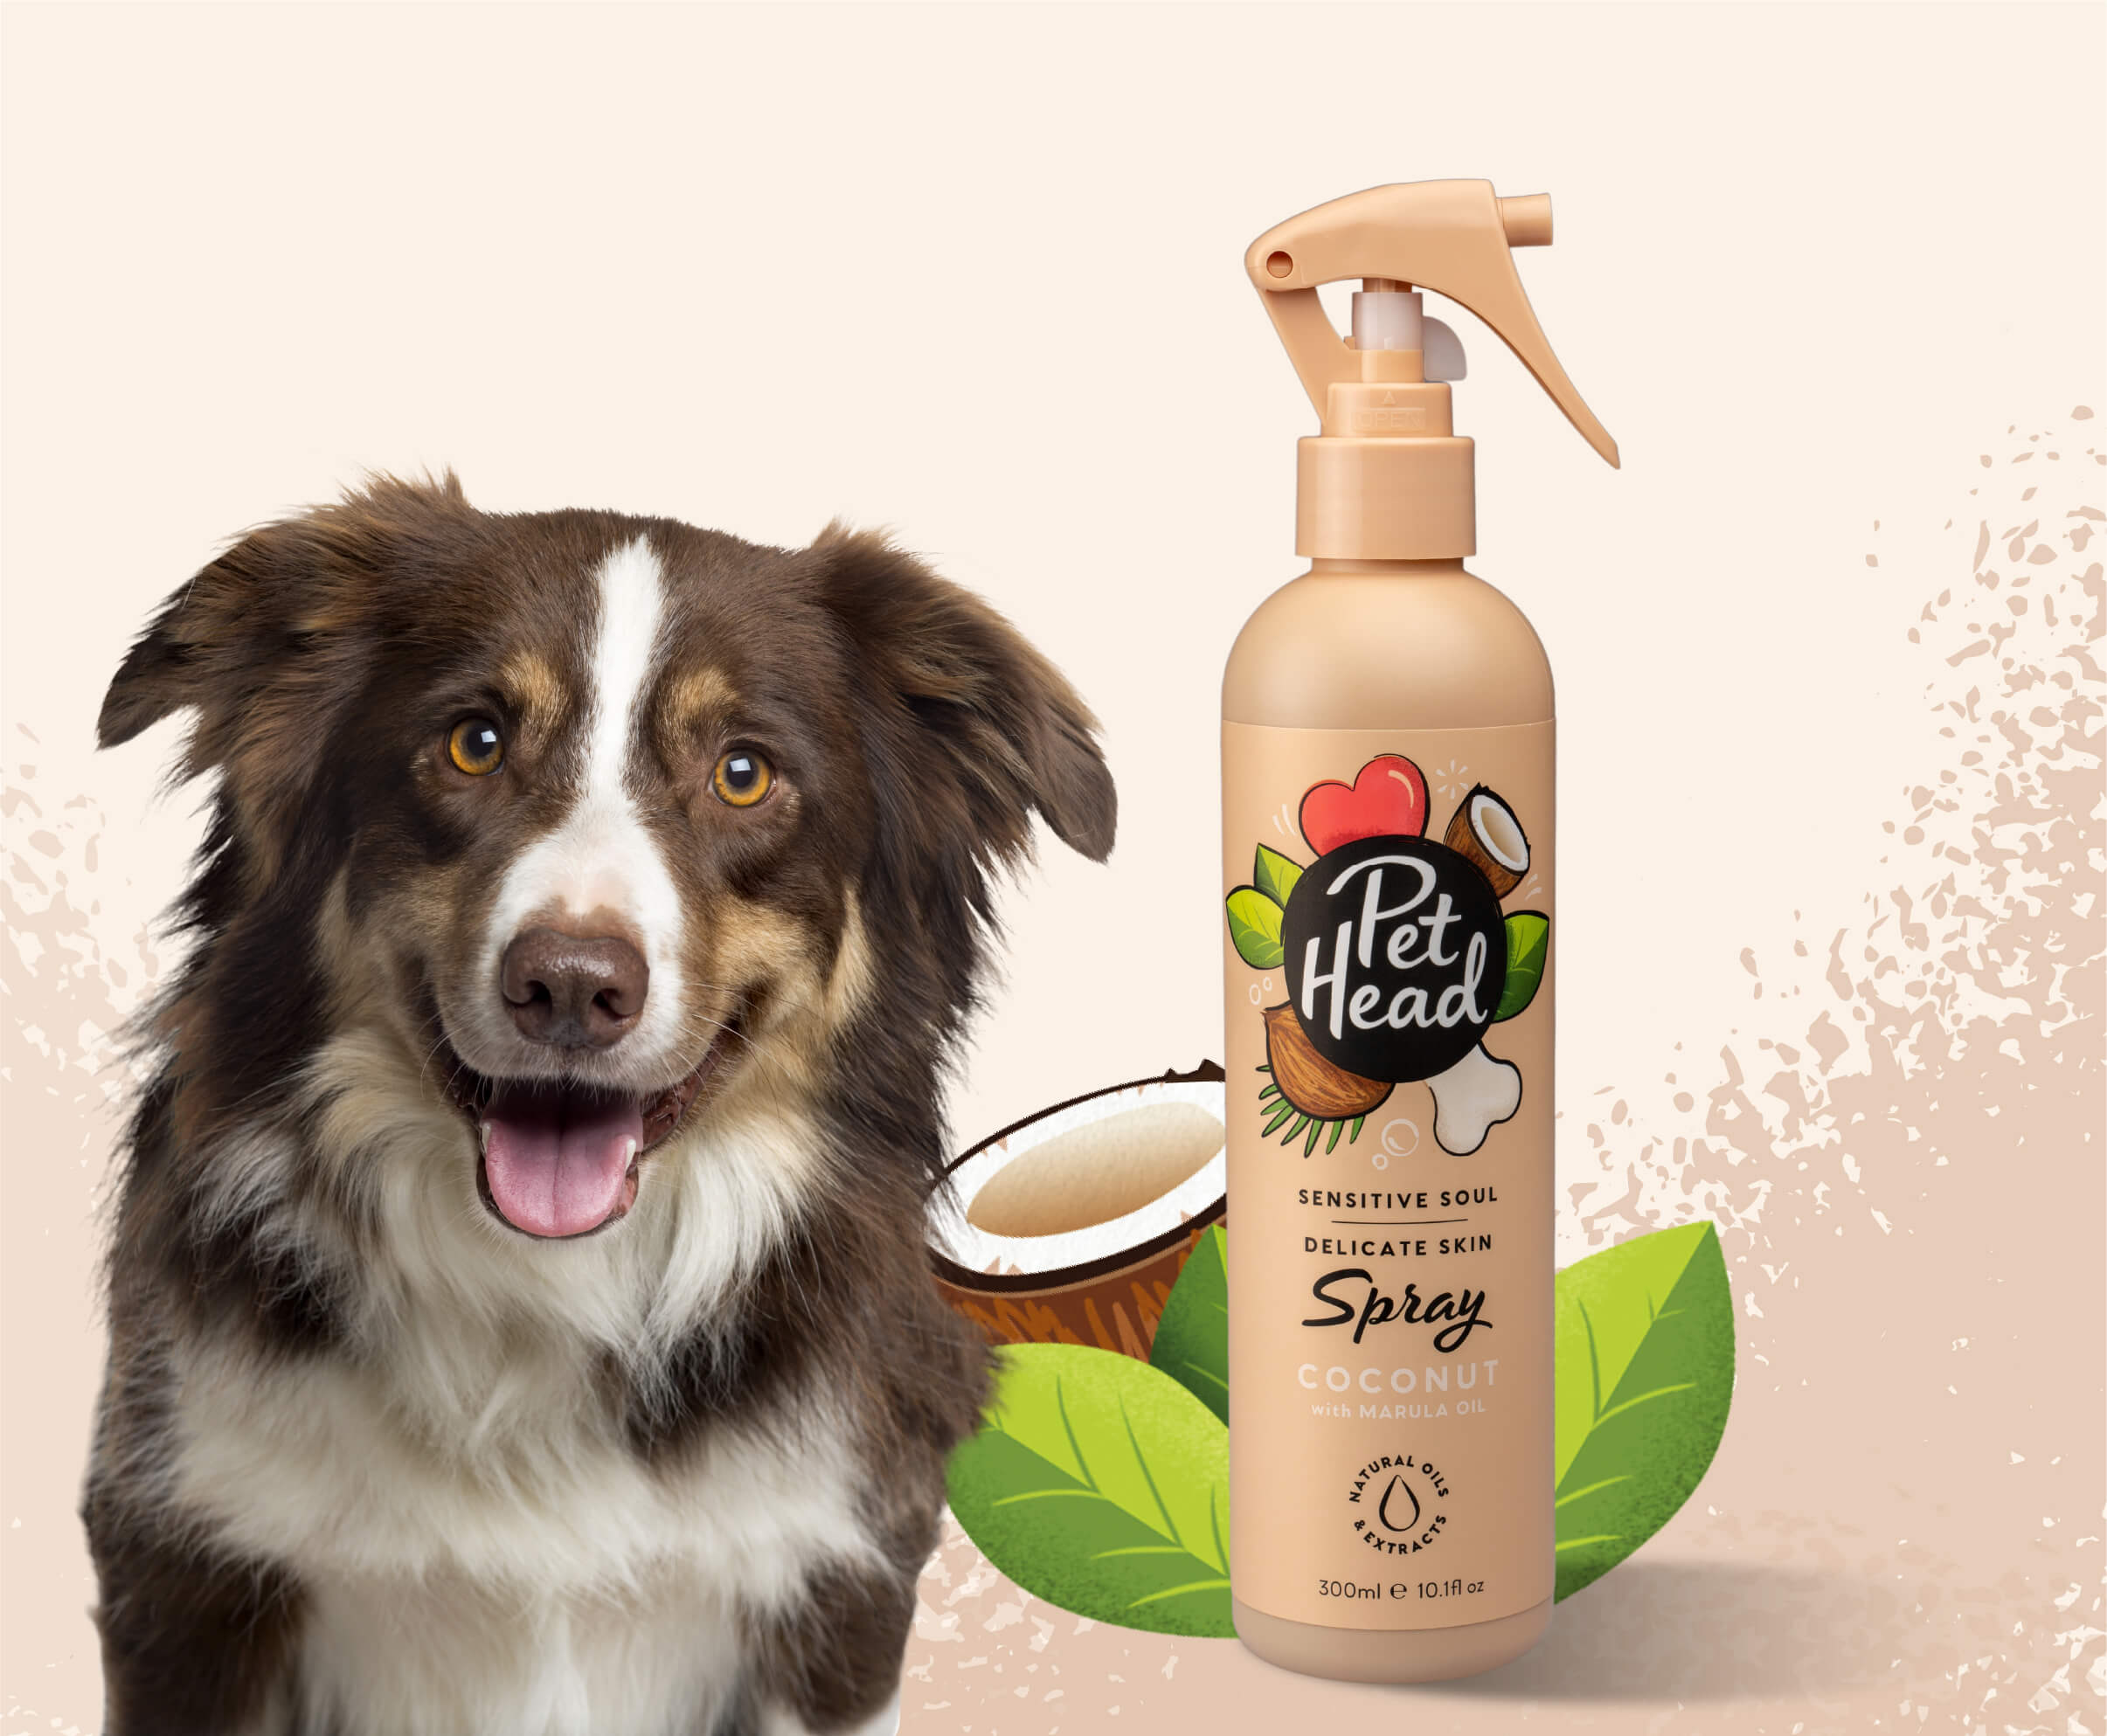 Product shot of the Pet Head Sensitive Soul Spray next to a happy dog